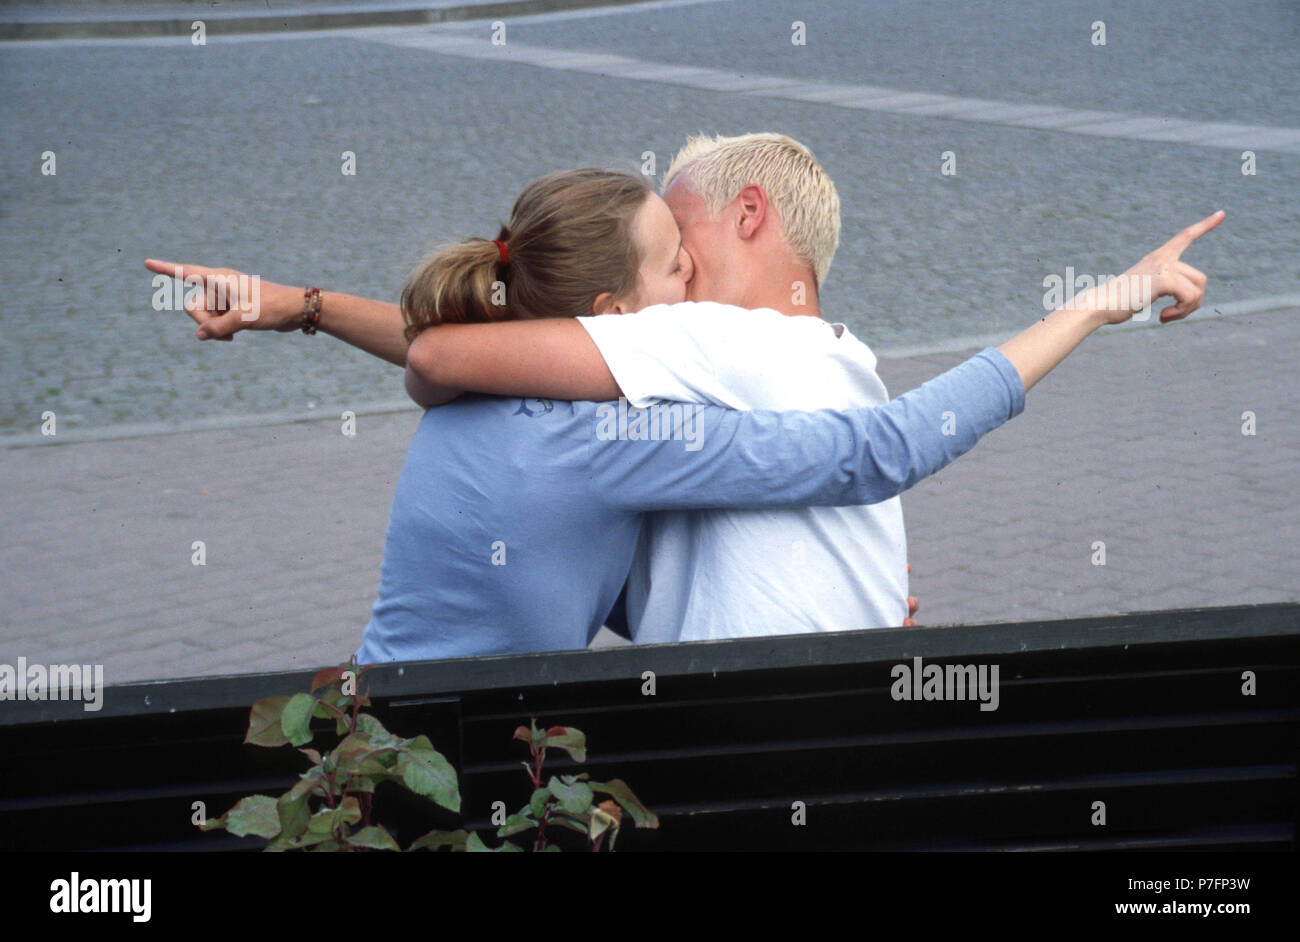 Different views, kissing couple shows in different directions, Berlin, Germany Stock Photo